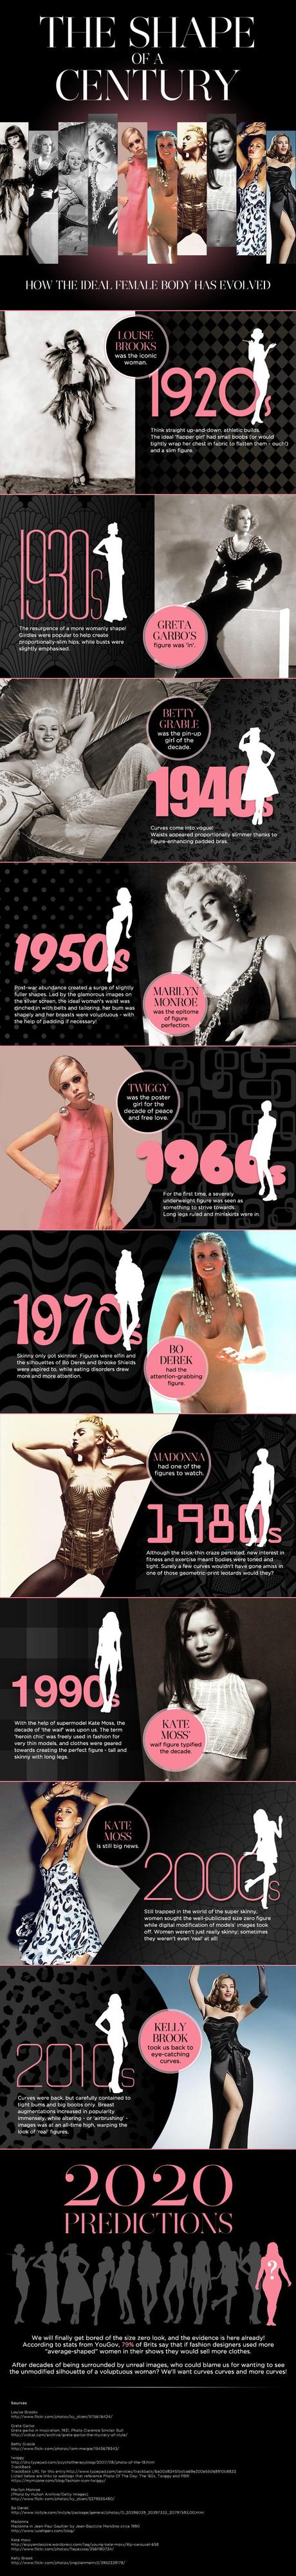 How Women's Bodies Have Evolved Infographic